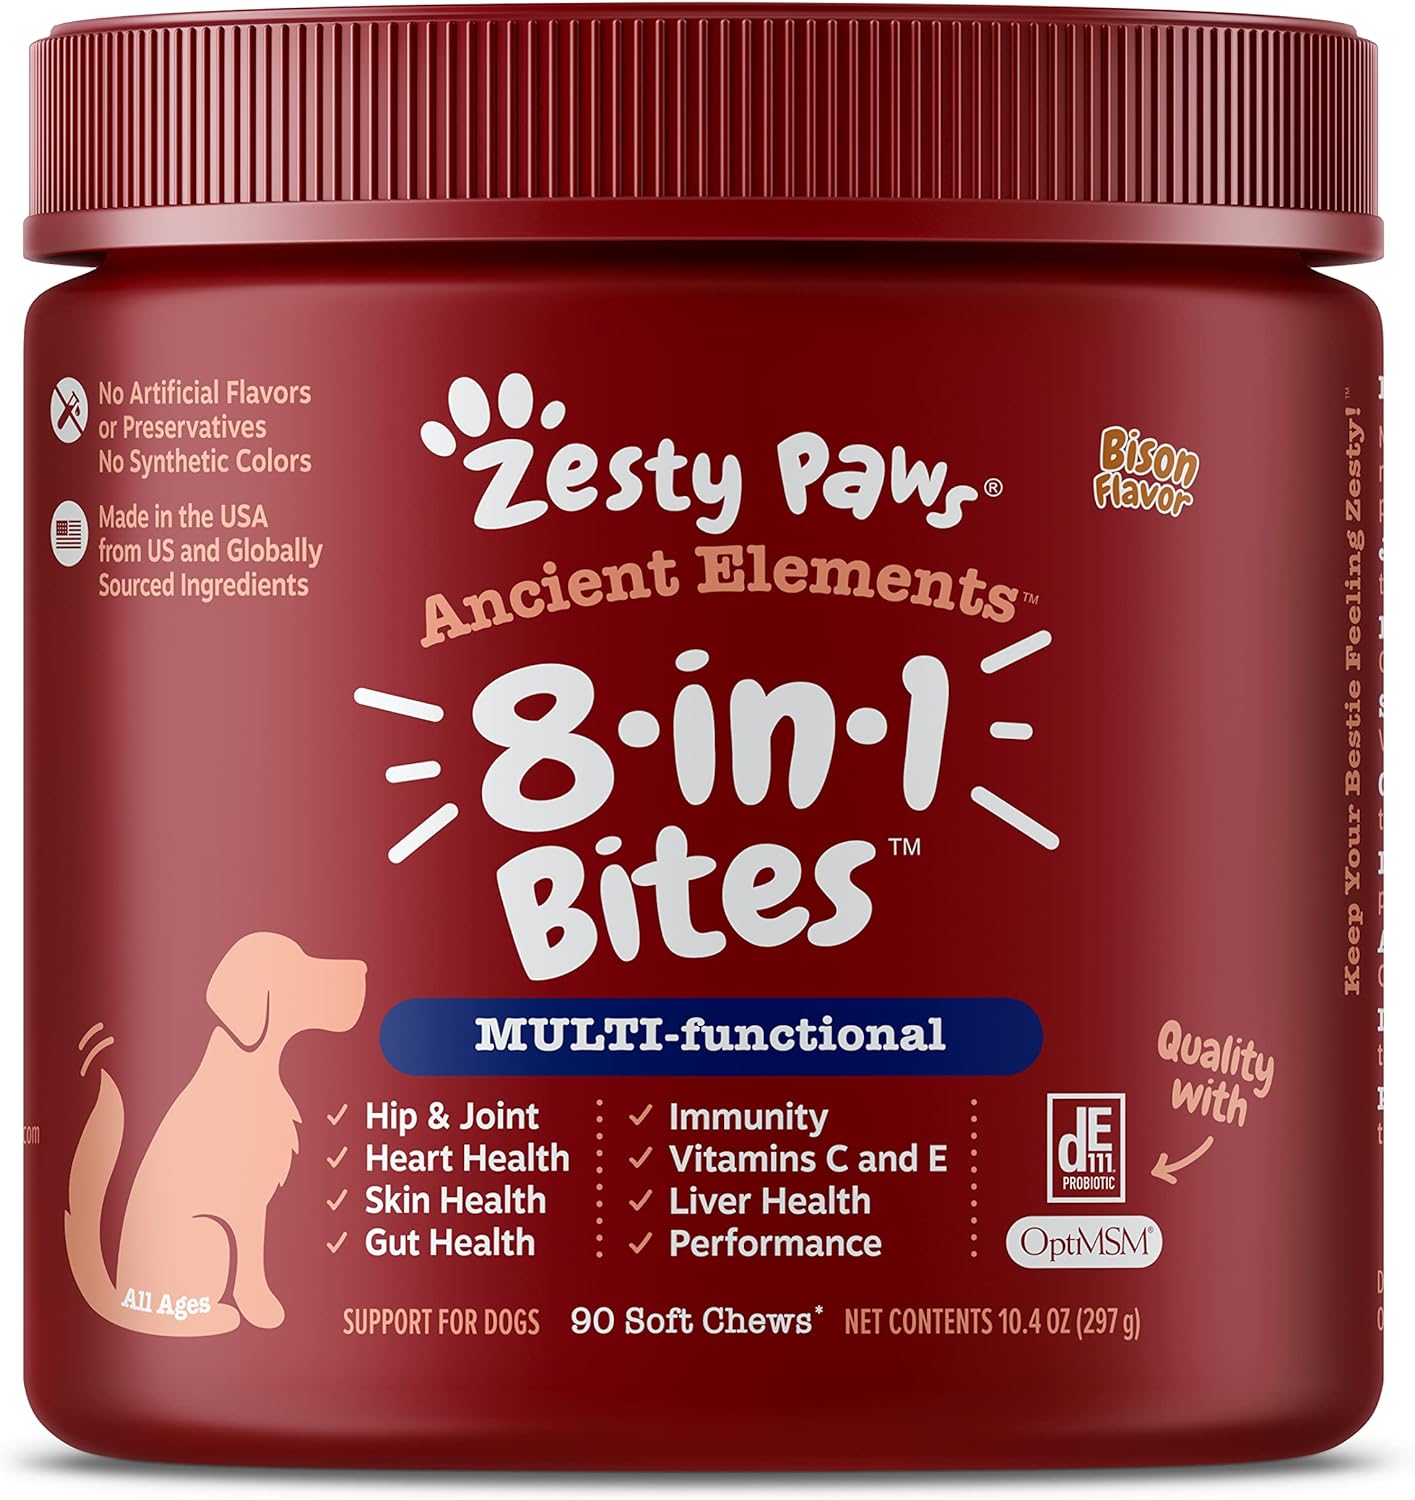 Zesty Paws Multivitamin Treats for Dogs - Glucosamine Chondroitin for Joint Support + Digestive Enzymes & Probiotics - Grain Free Dog Vitamin for Skin & Coat + Immune Health - AE - 90 Count